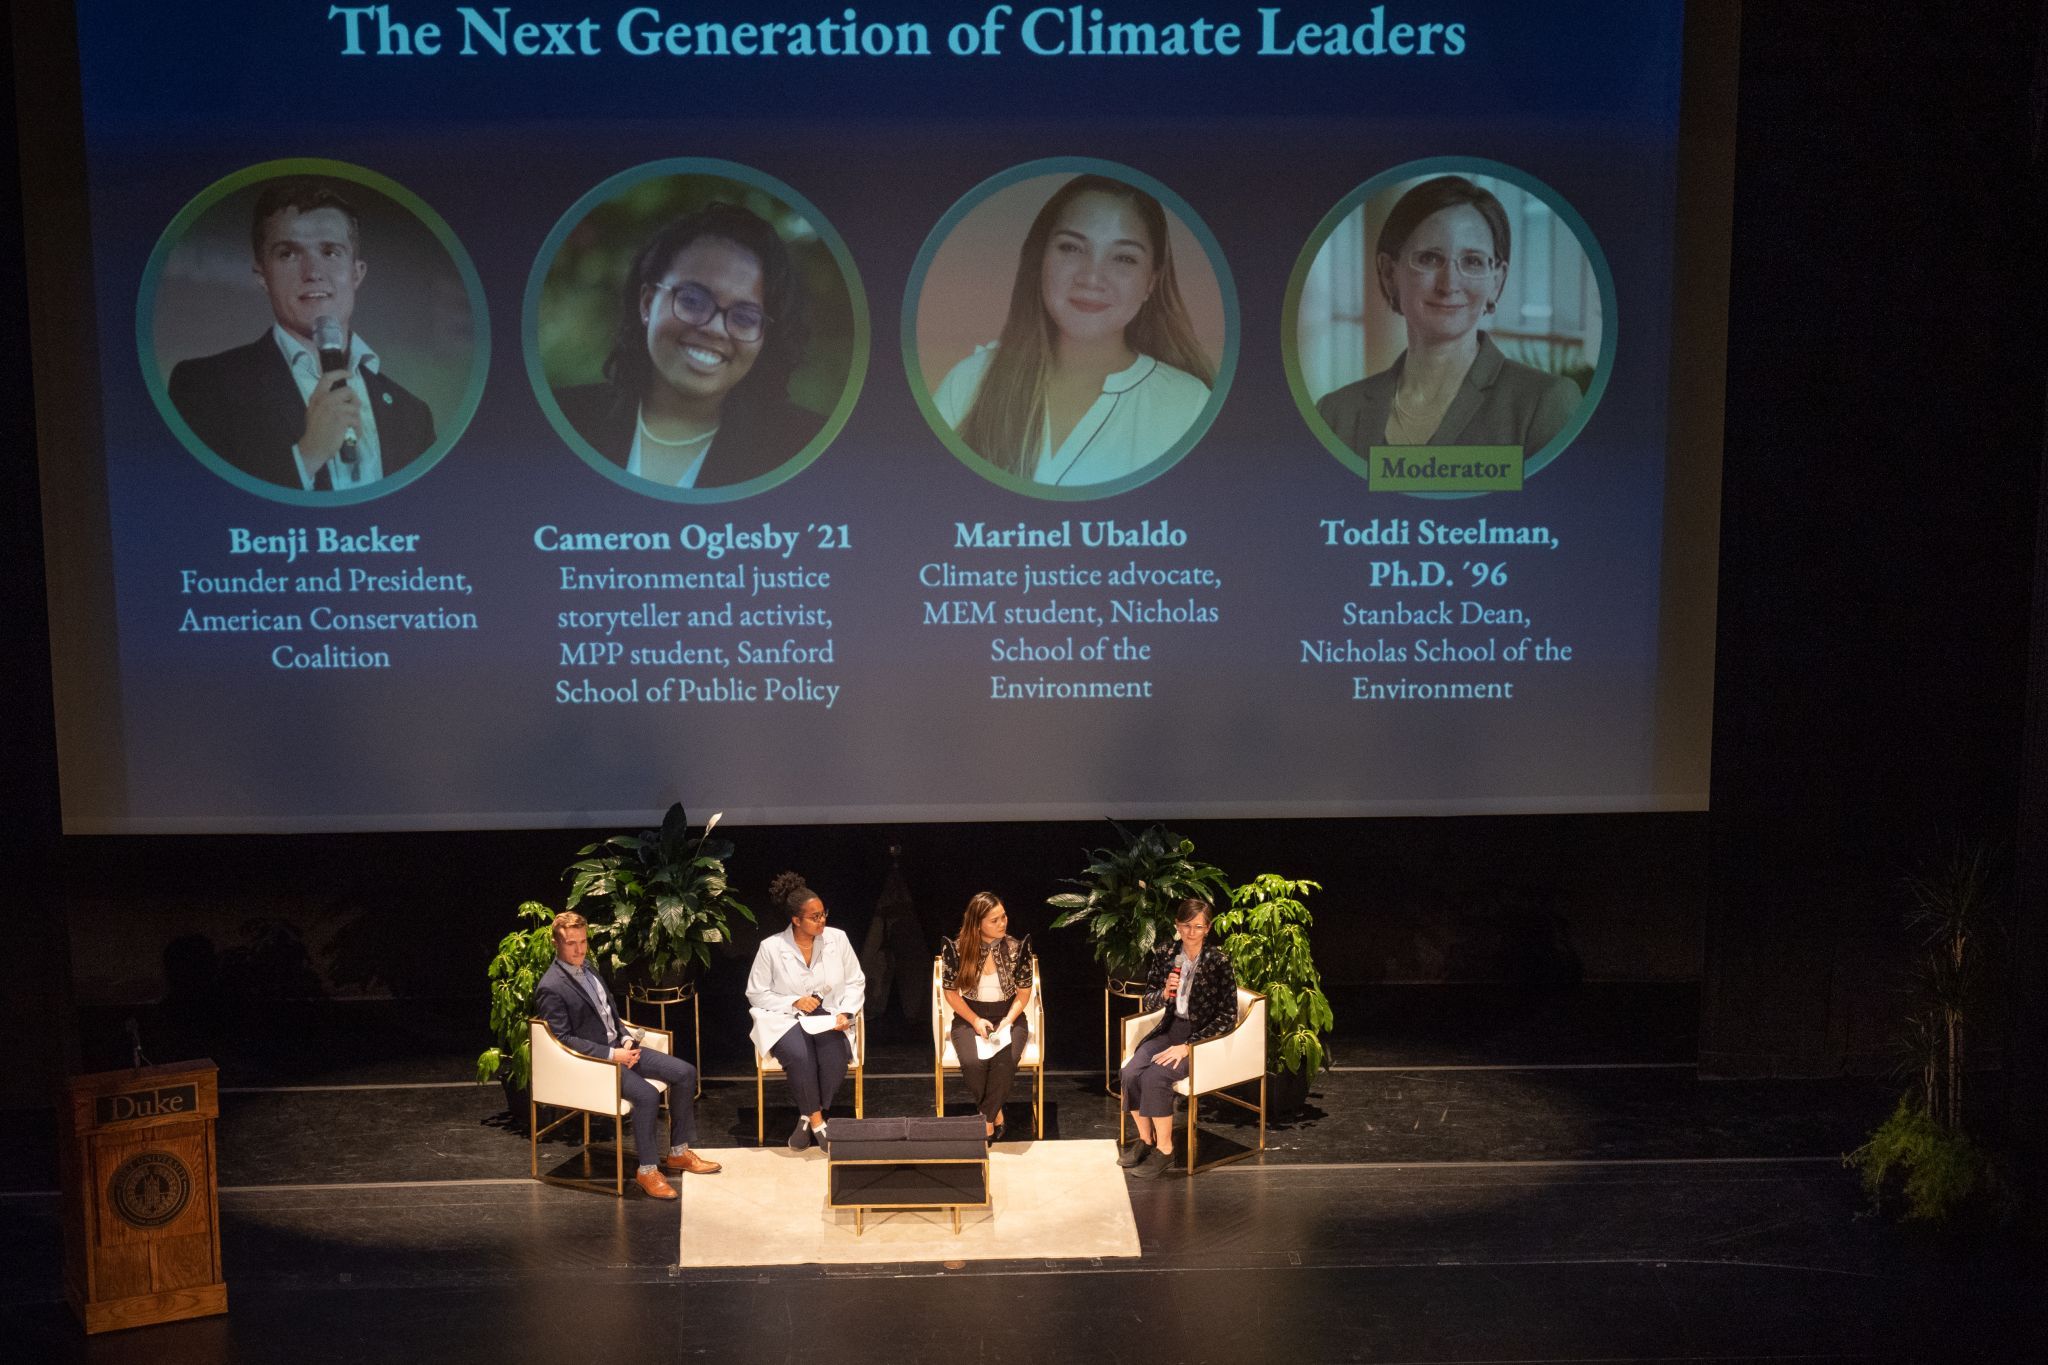 Cameron participating in university climate commitment panel in her capacity as a campus organizer, advocate for enhanced environmental justice literacy, and facilitator of institutional-community partnerships.